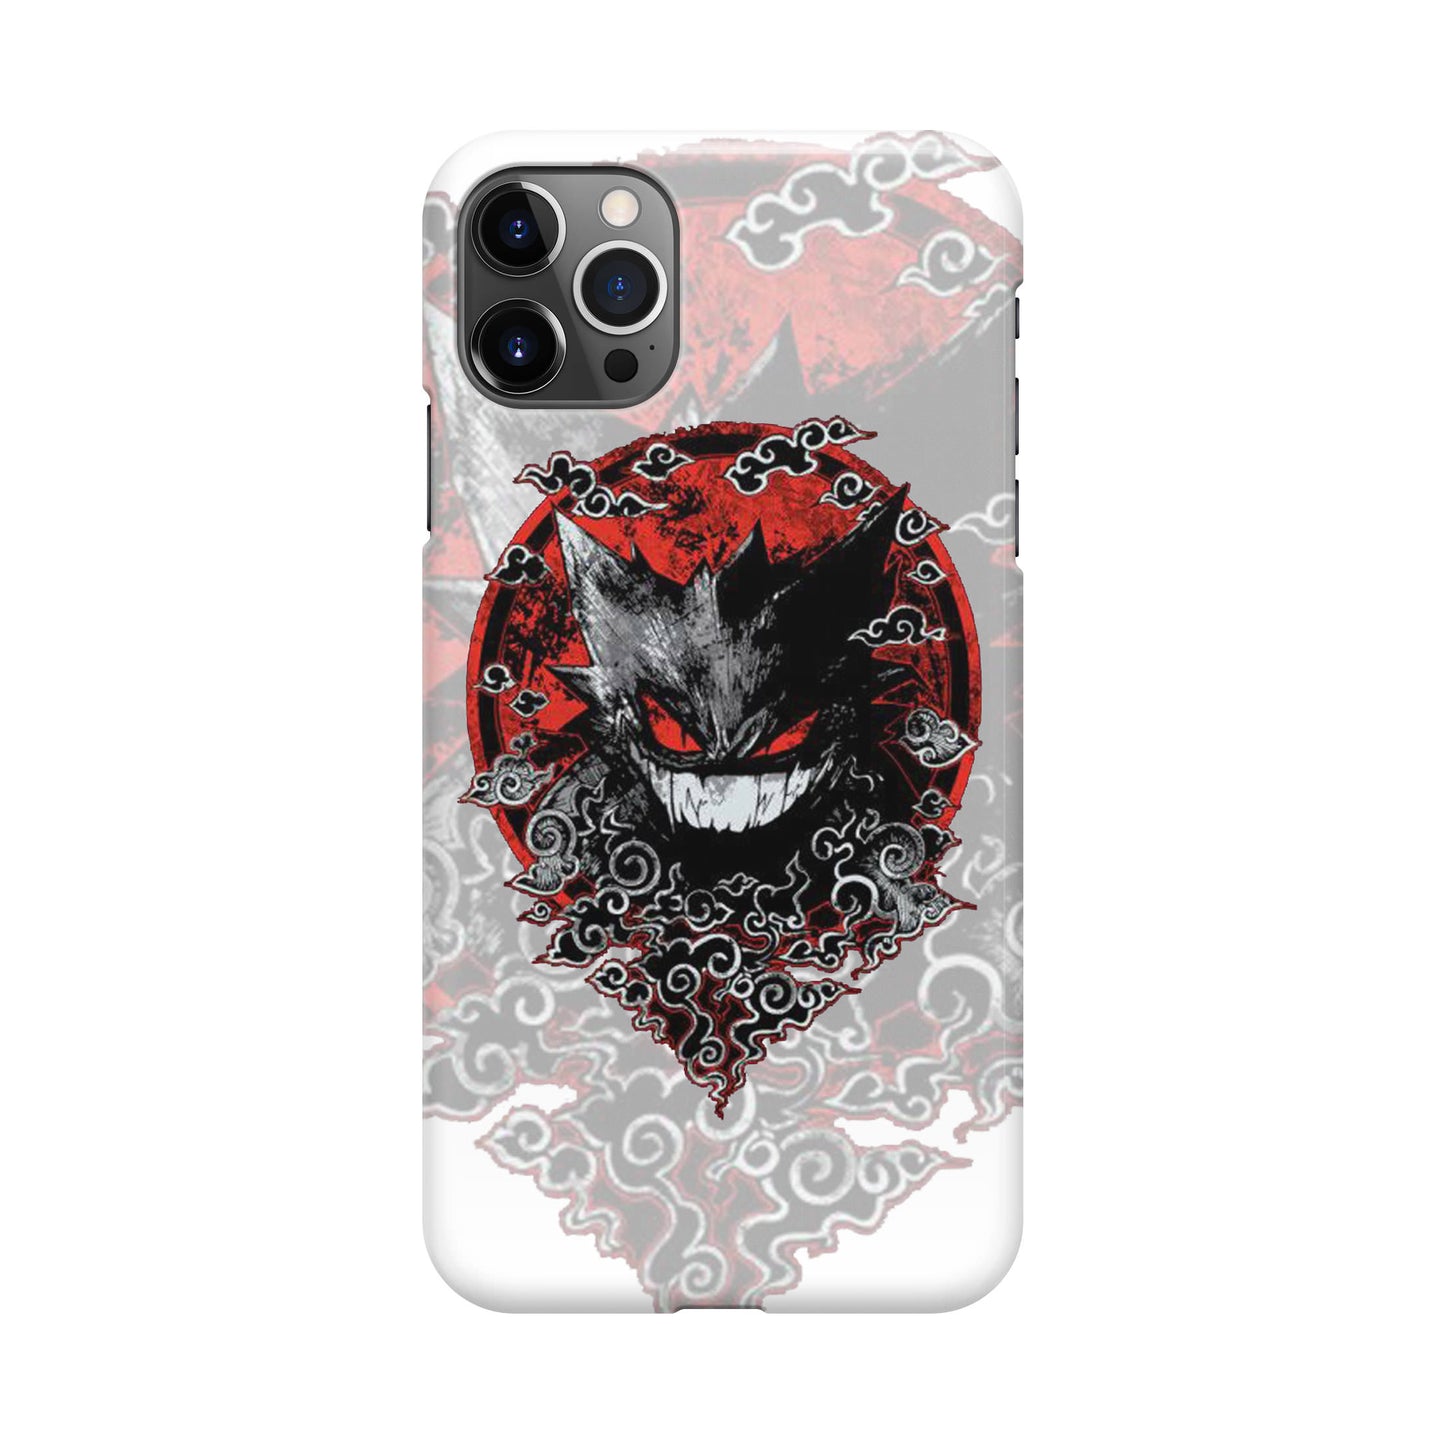 Gengar The Ghost iPhone 12 Pro Case